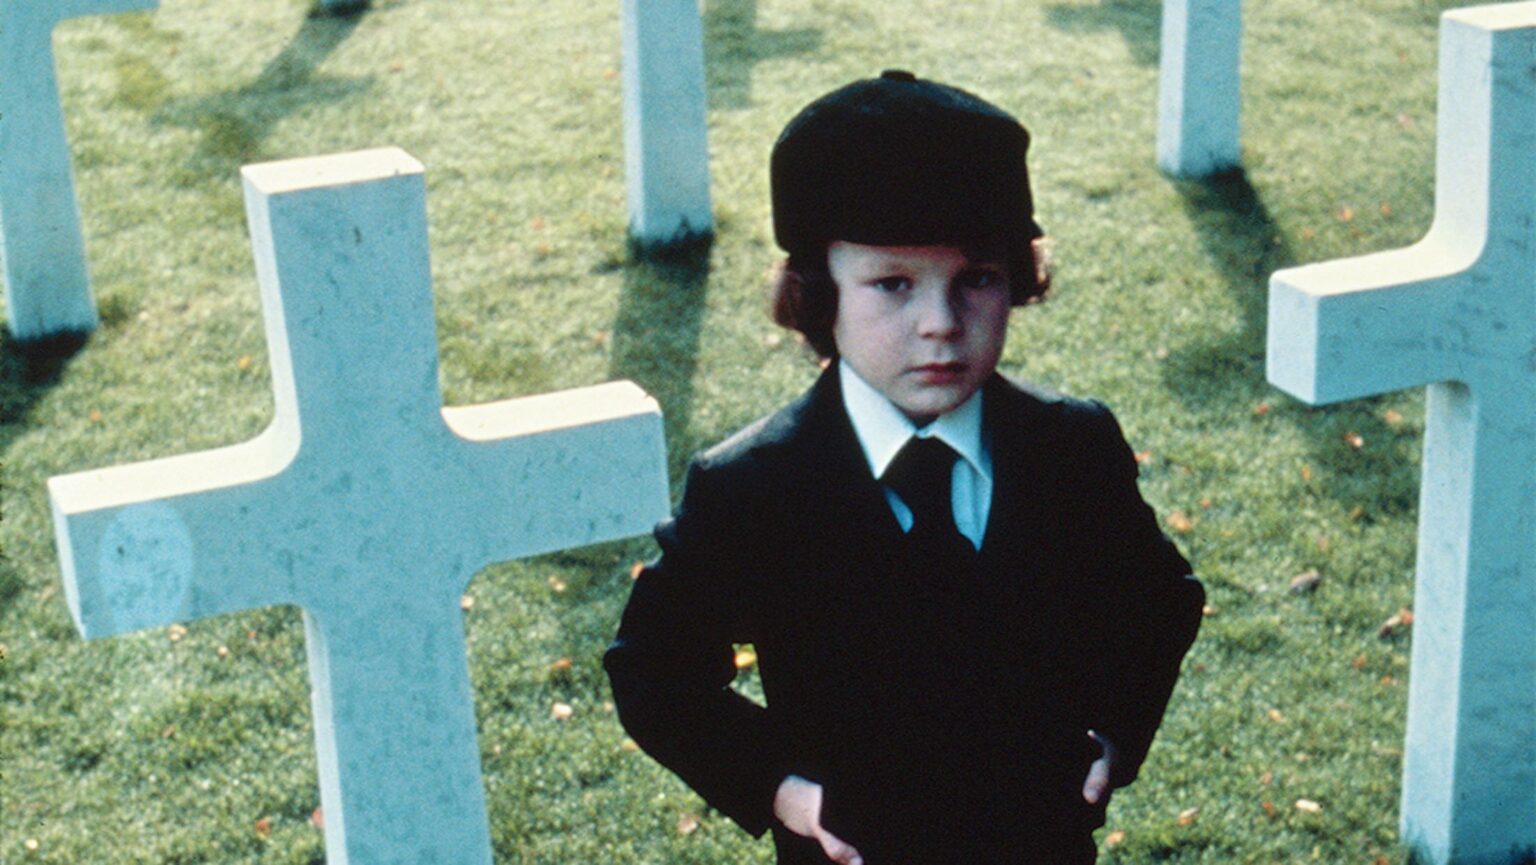 Cast & crew of 'The Omen' may have been exposed to something more real than the fictionalized portrayal of a demonic child – a cursed set. Here's how.